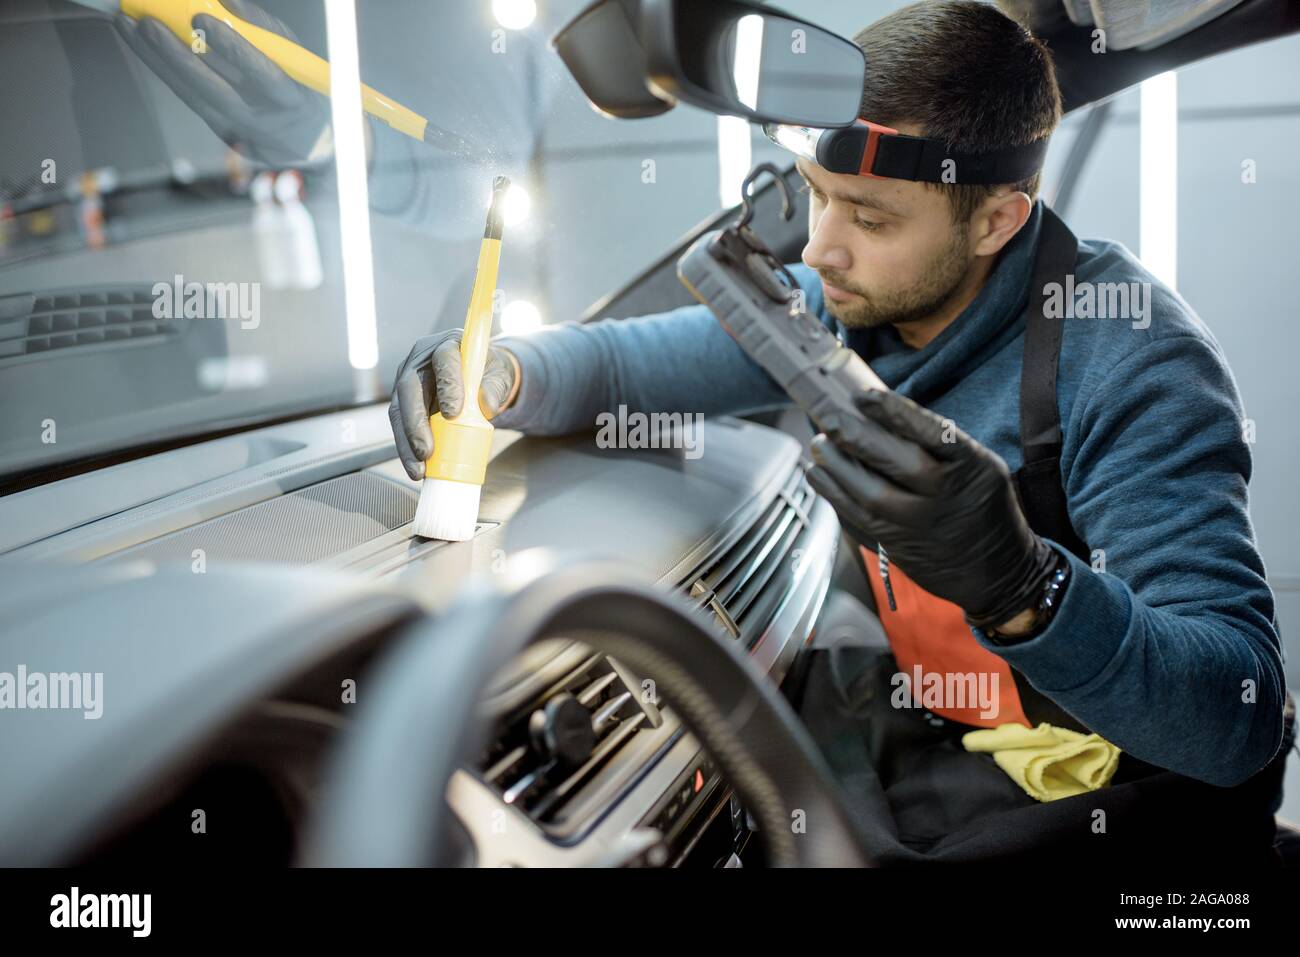 Car service worker in uniform provides a professional vehicle interior cleaning, wiping front panel with a brush at the car service station Stock Photo